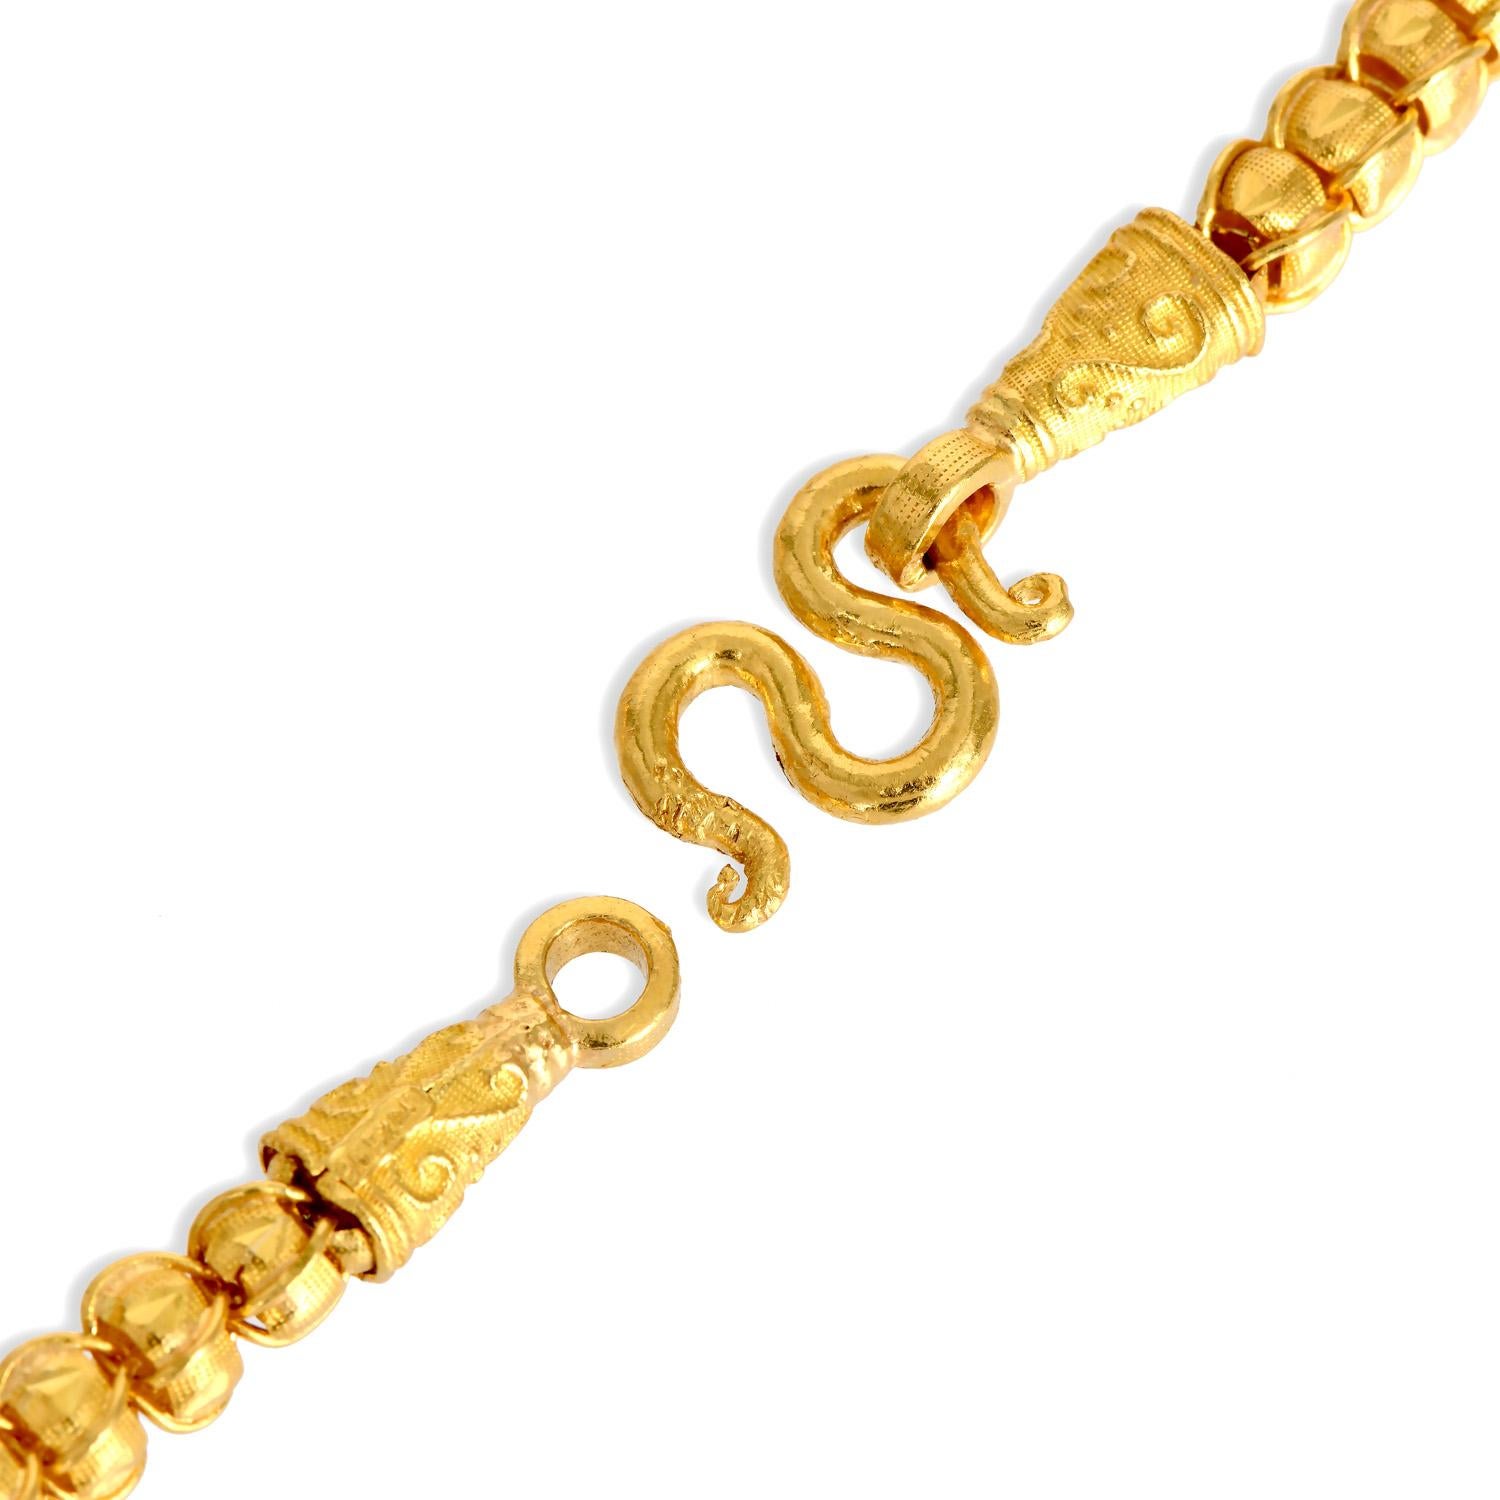 Heavy  79 Grams 22K Gold Engraved Beaded Link Long Necklace In Excellent Condition For Sale In Miami, FL